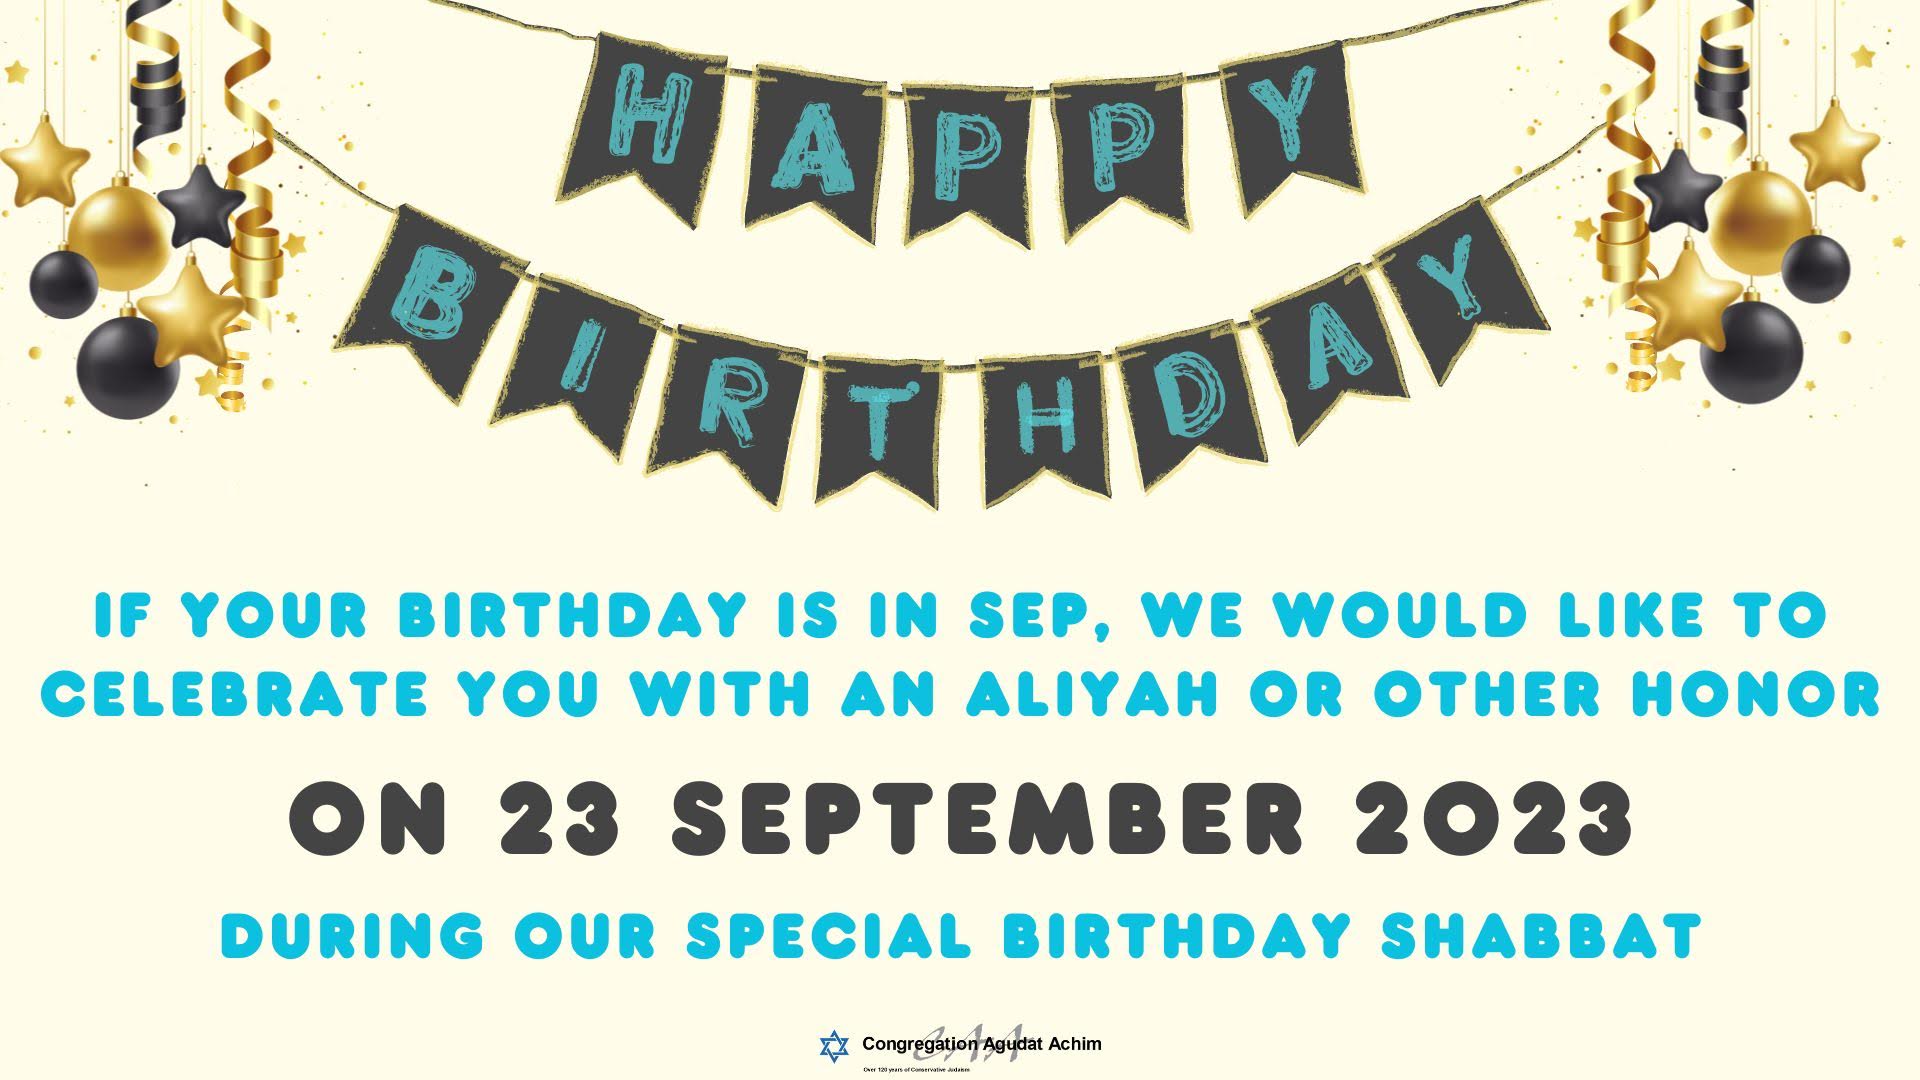 Celebrate and attend Shabbat morning services in September as we honor our congregants' birthdays